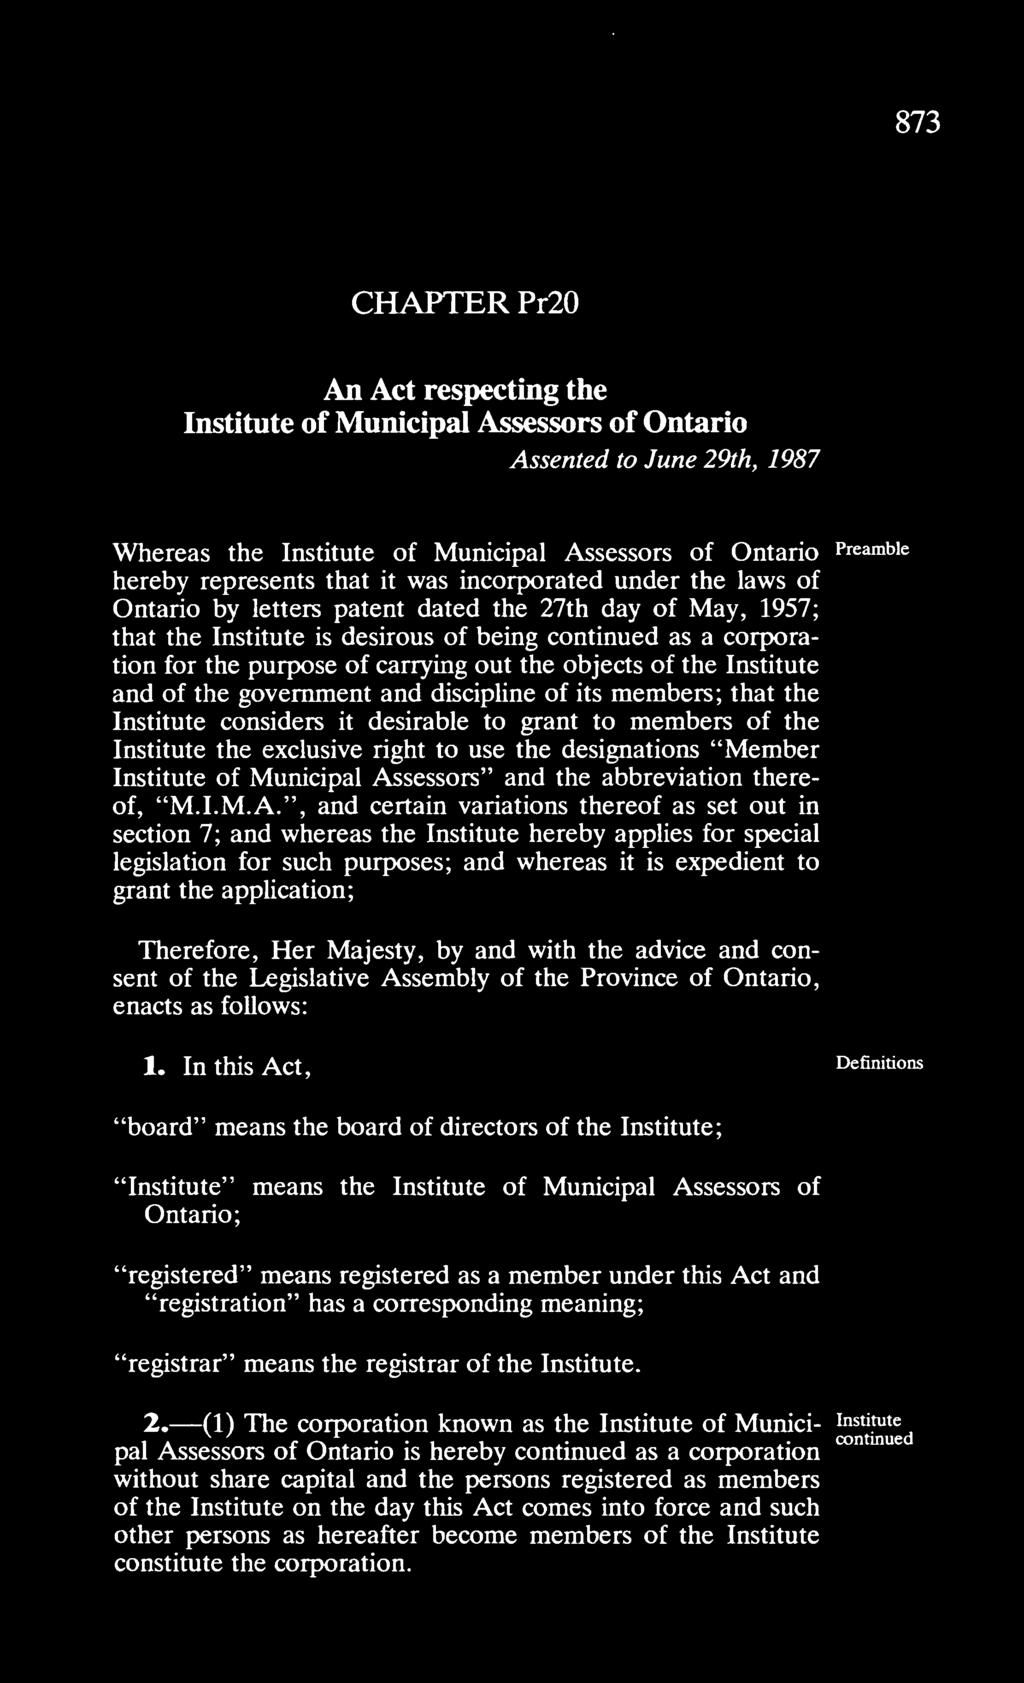 objects of the Institute and of the government and discipune of its members; that the Institute considers it desirable to grant to members of the Institute the exclusive right to use the designations